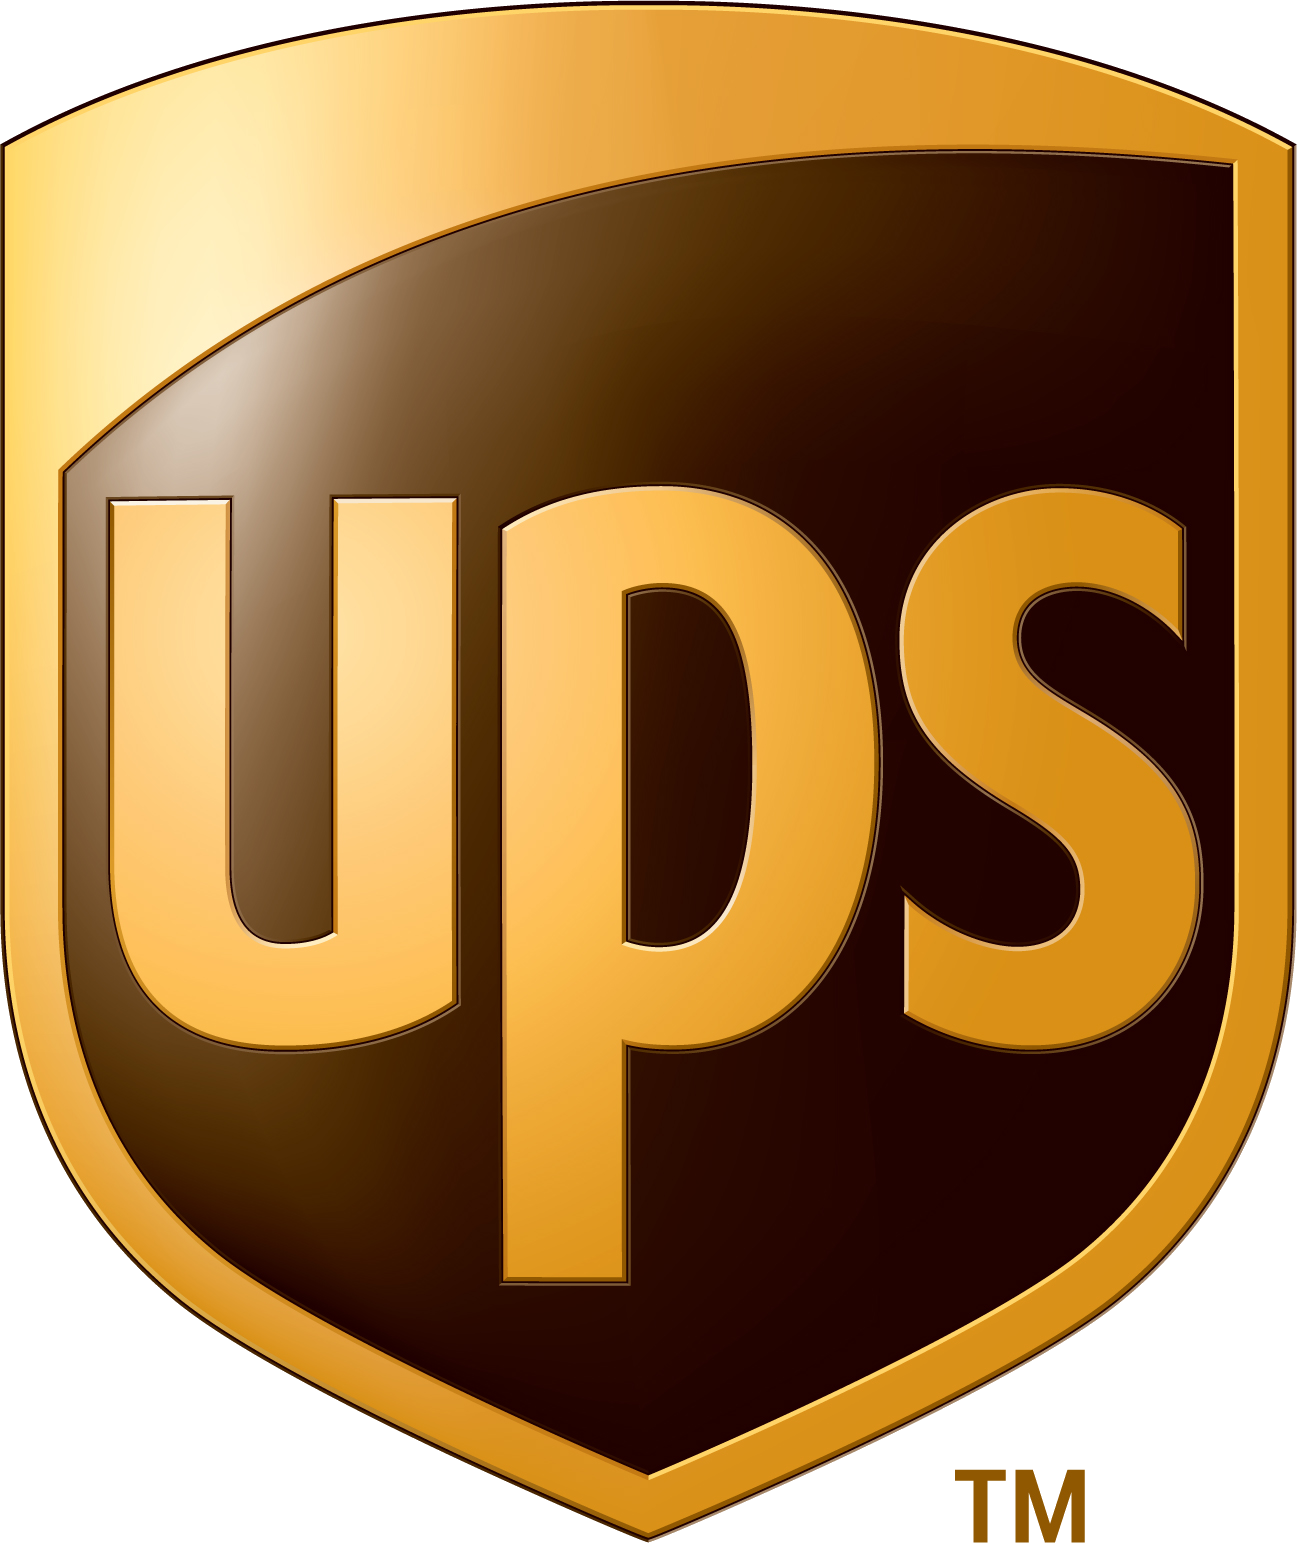 UPS will hire over 90,000 seasonal workers for holiday delivery surge is ups store open near me